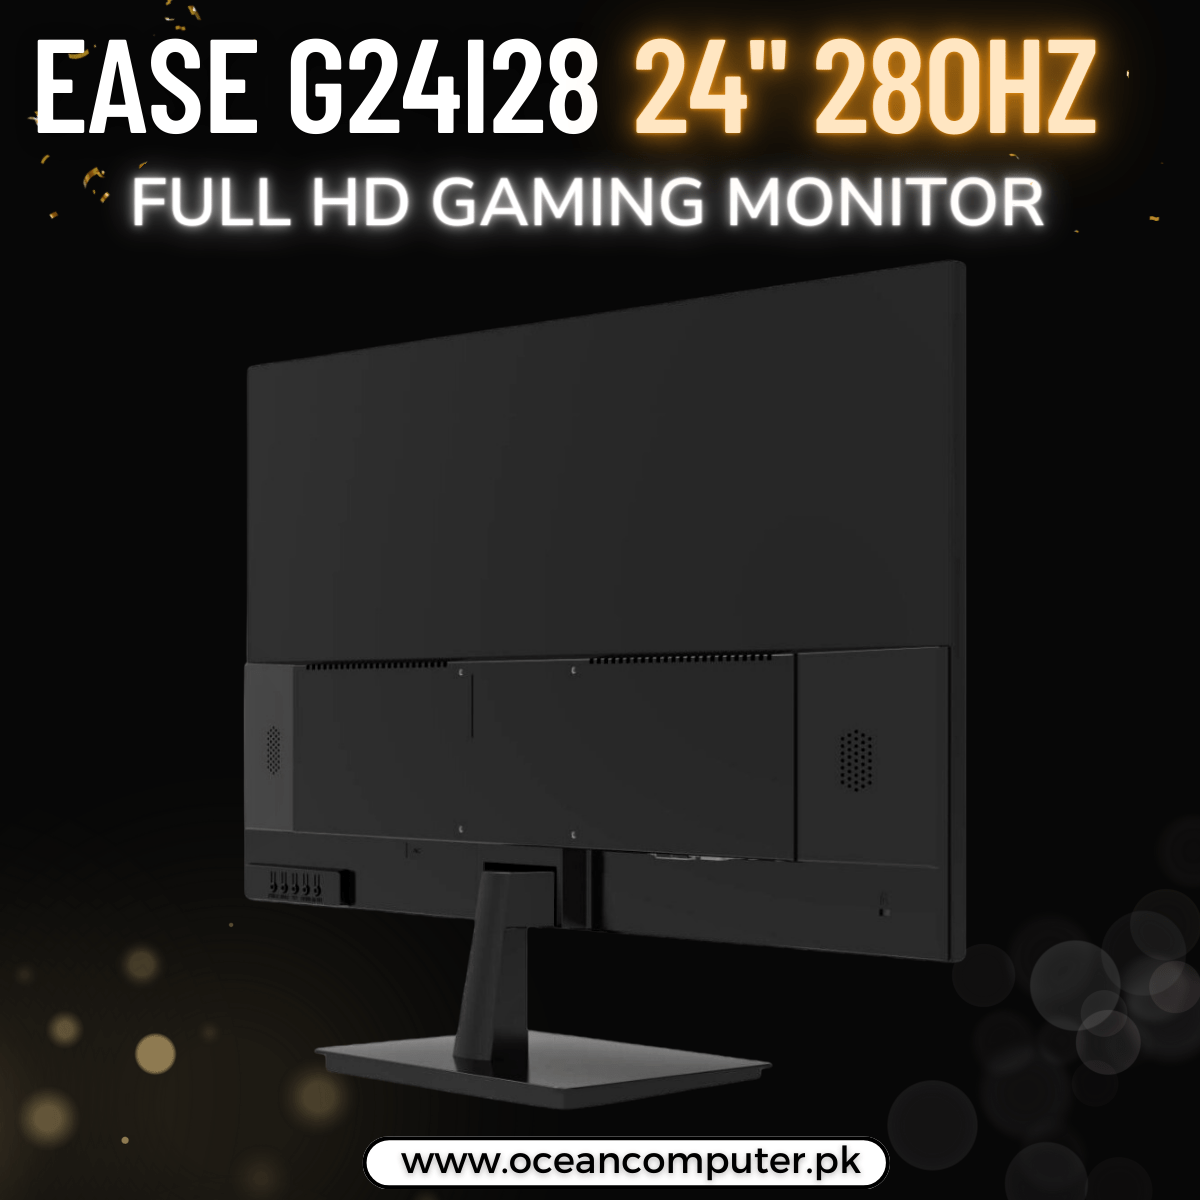 EASE O22V75 22″ Full HD Gaming Monitor Price In Pakistan (4)